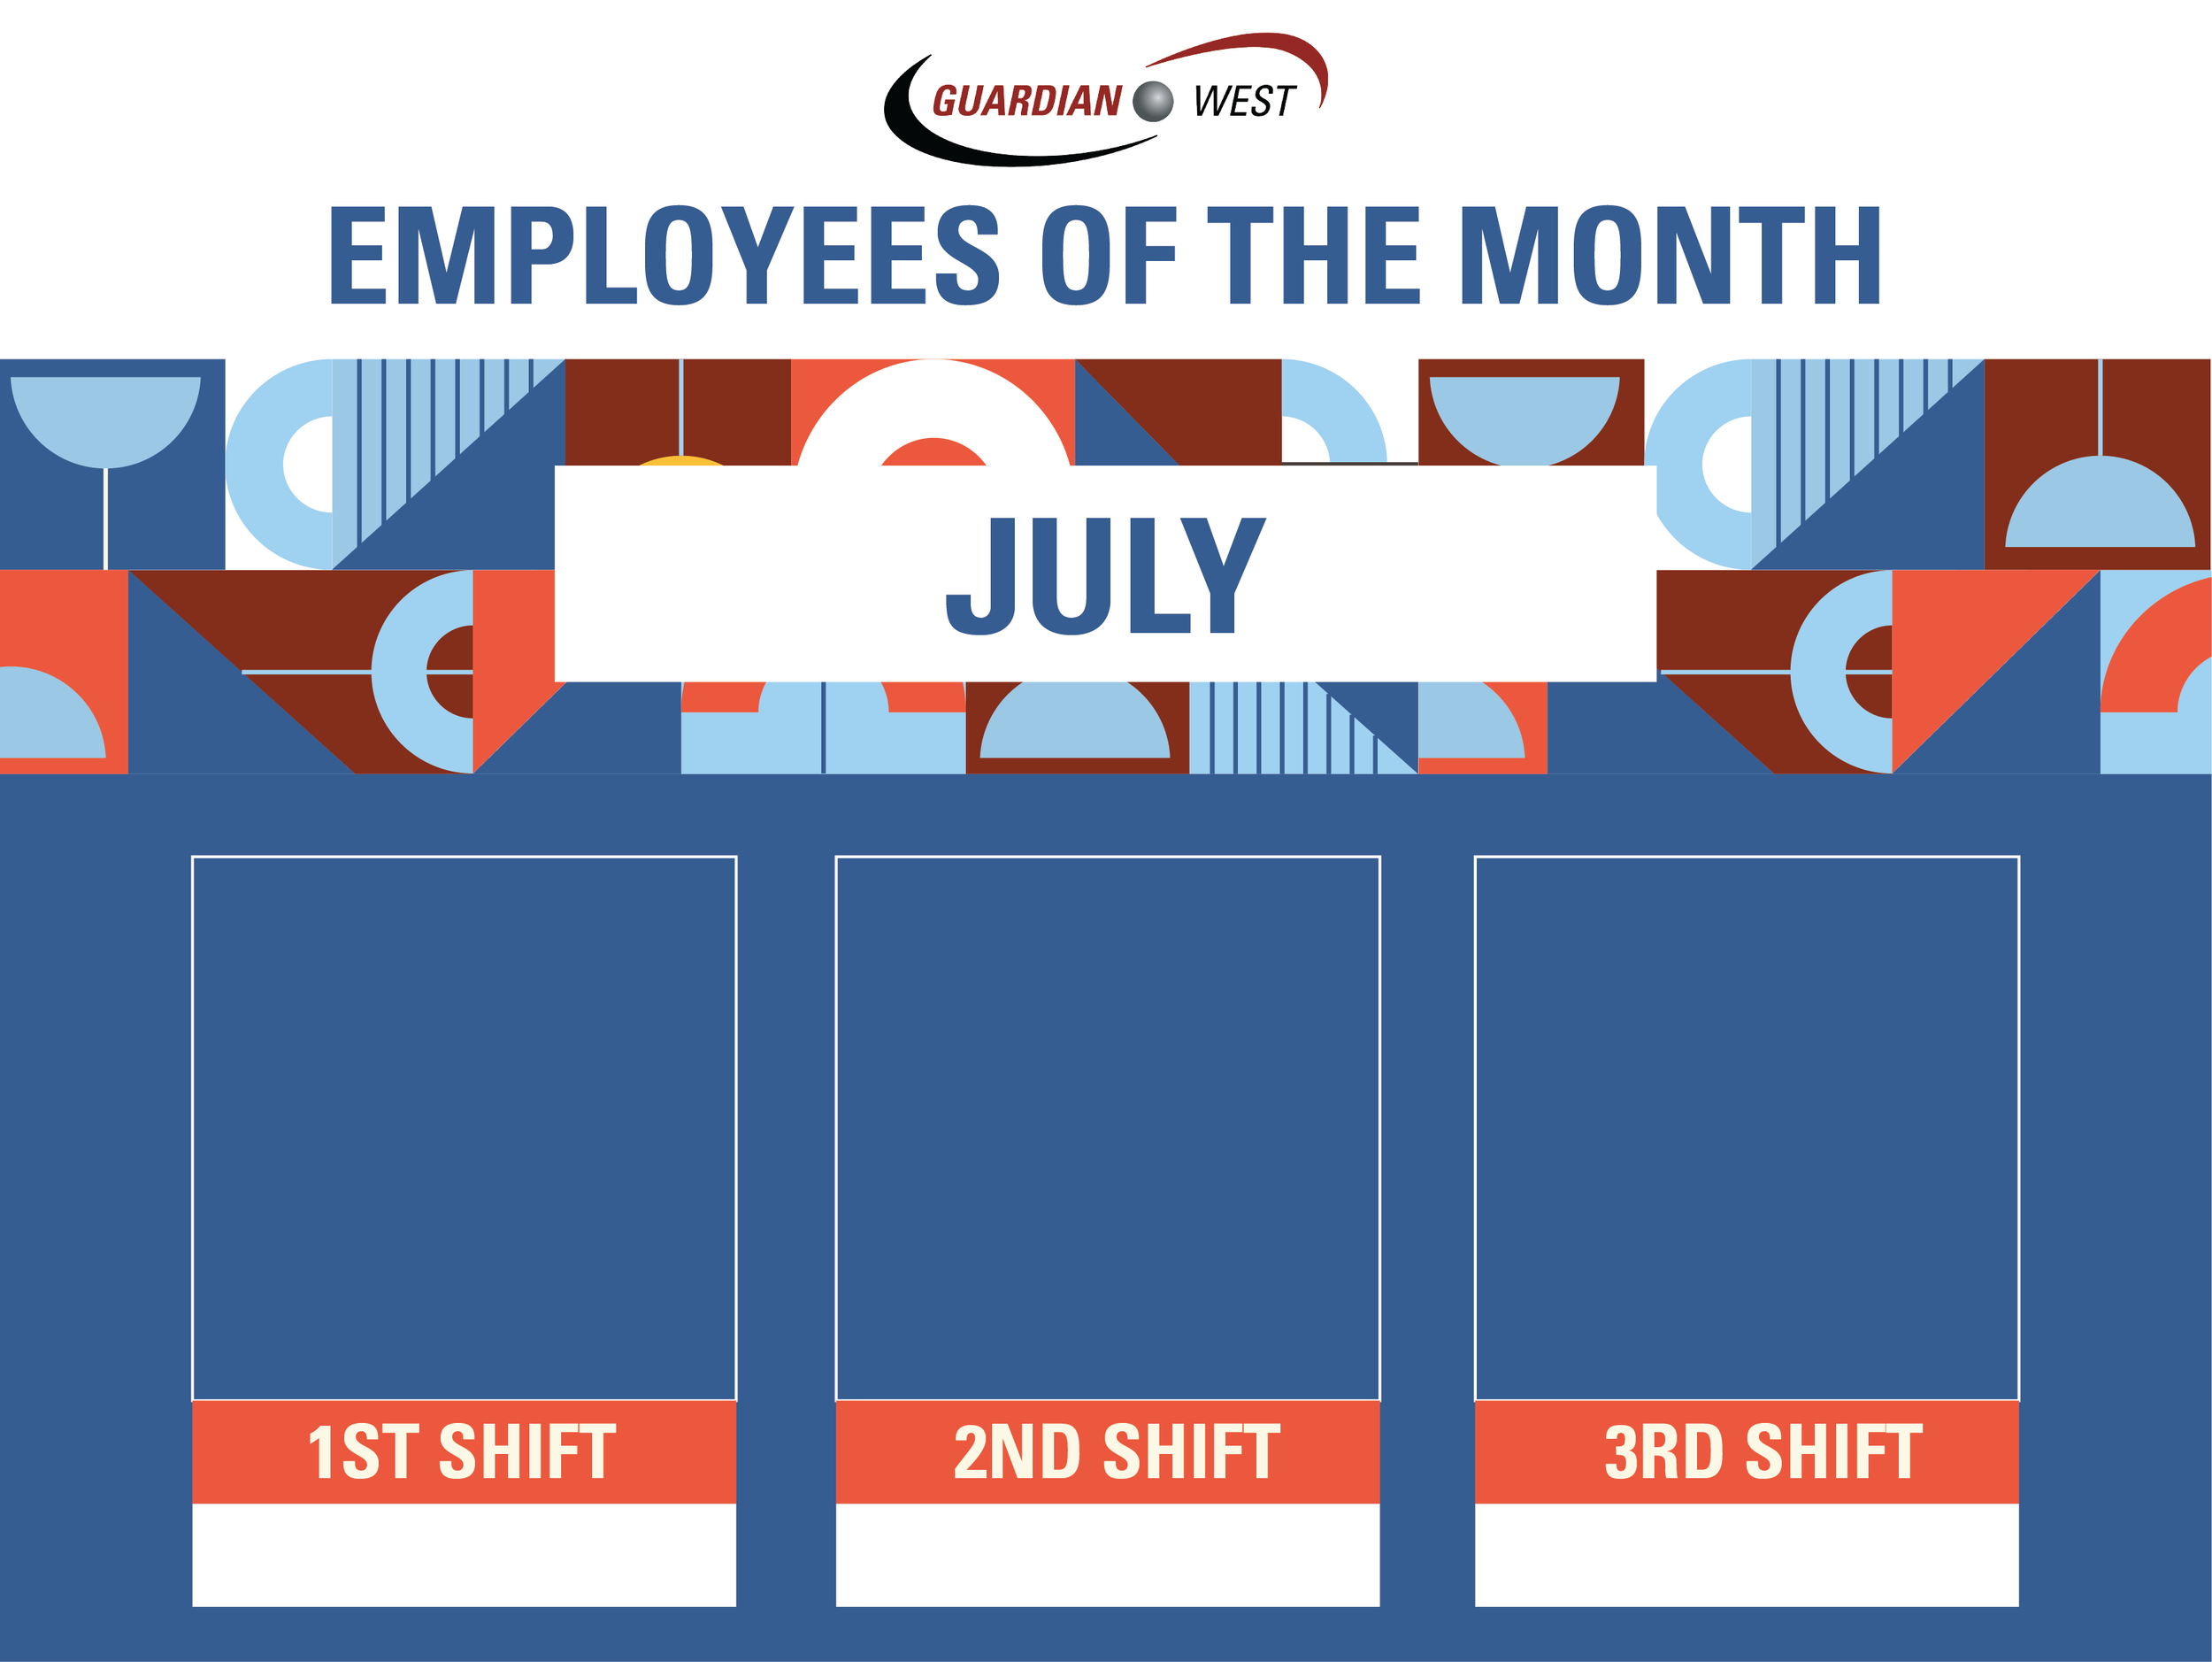 GW_Employee of the month2-08.png